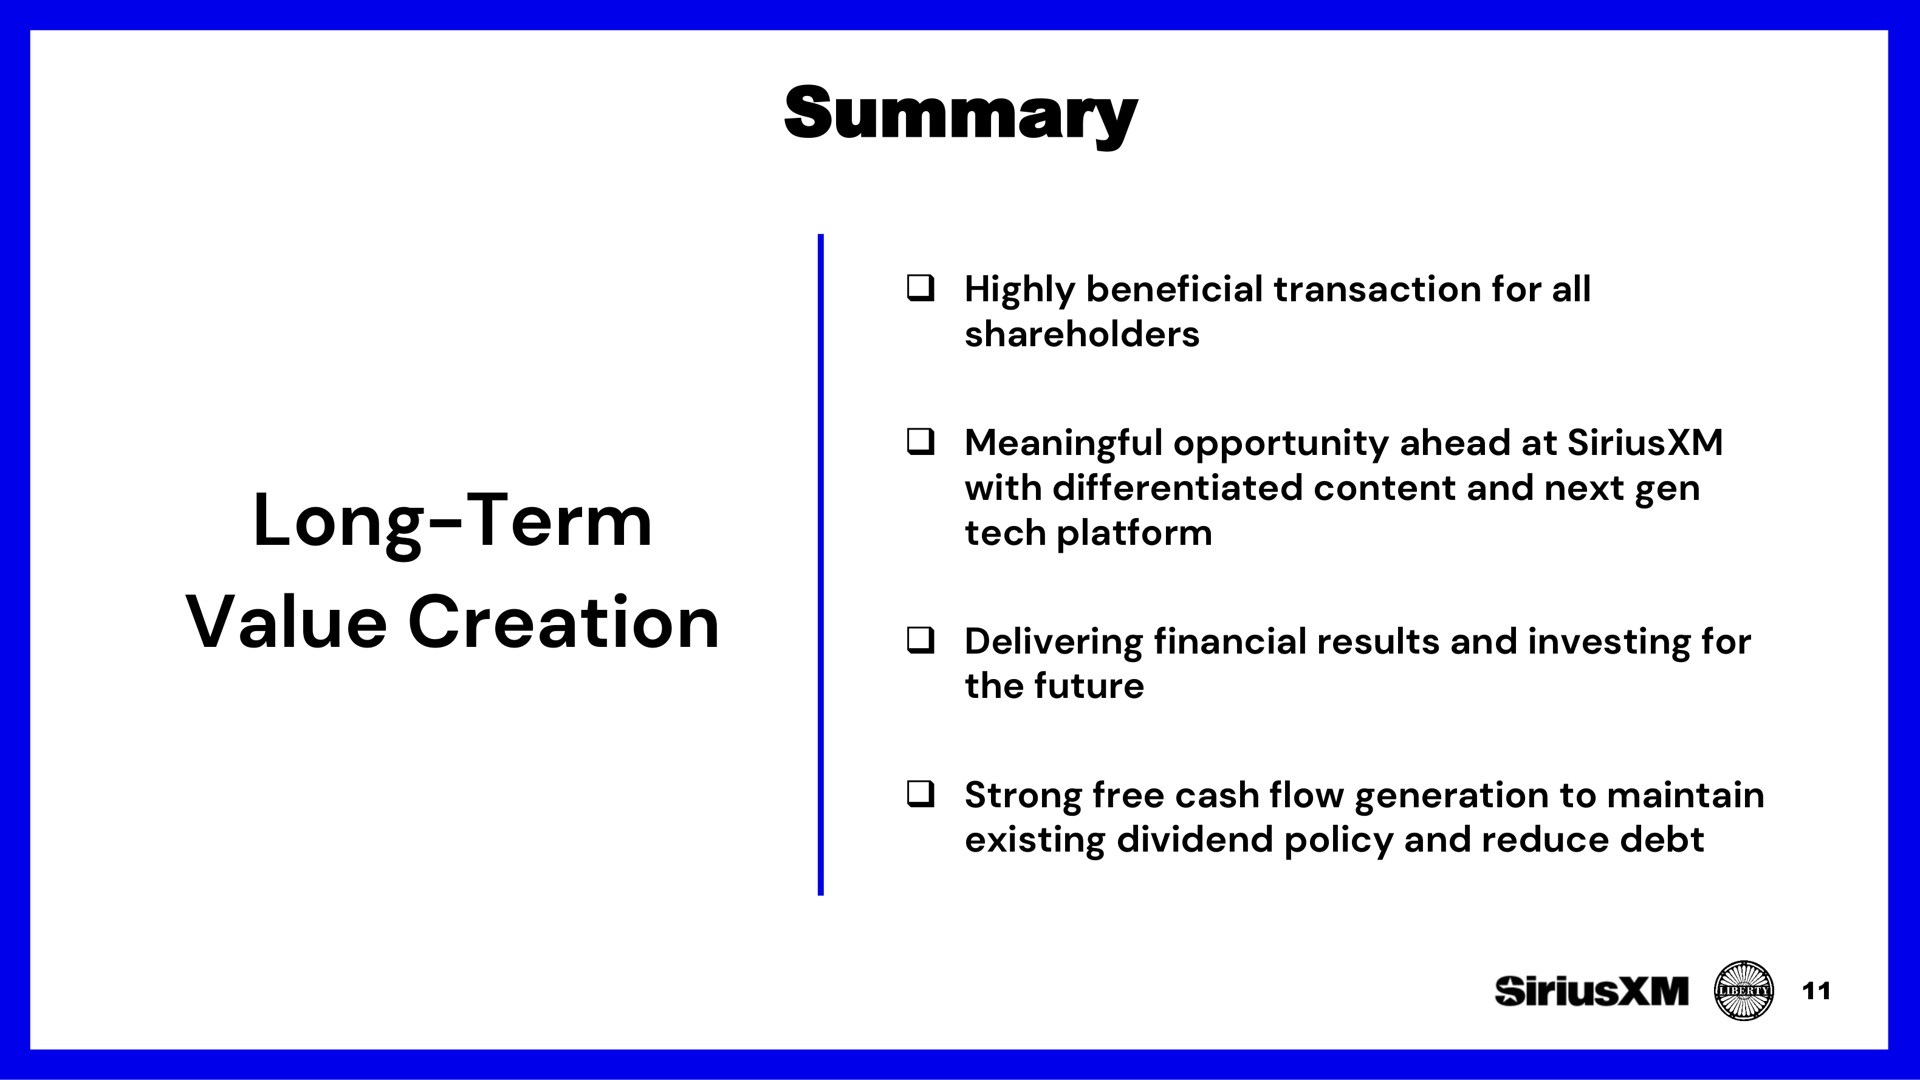 long term value creation summary highly beneficial transaction for all shareholders meaningful opportunity ahead at with differentiated content and next gen tech platform delivering financial results and investing for the future strong free cash flow generation to maintain existing dividend policy and reduce debt | SiriusXM